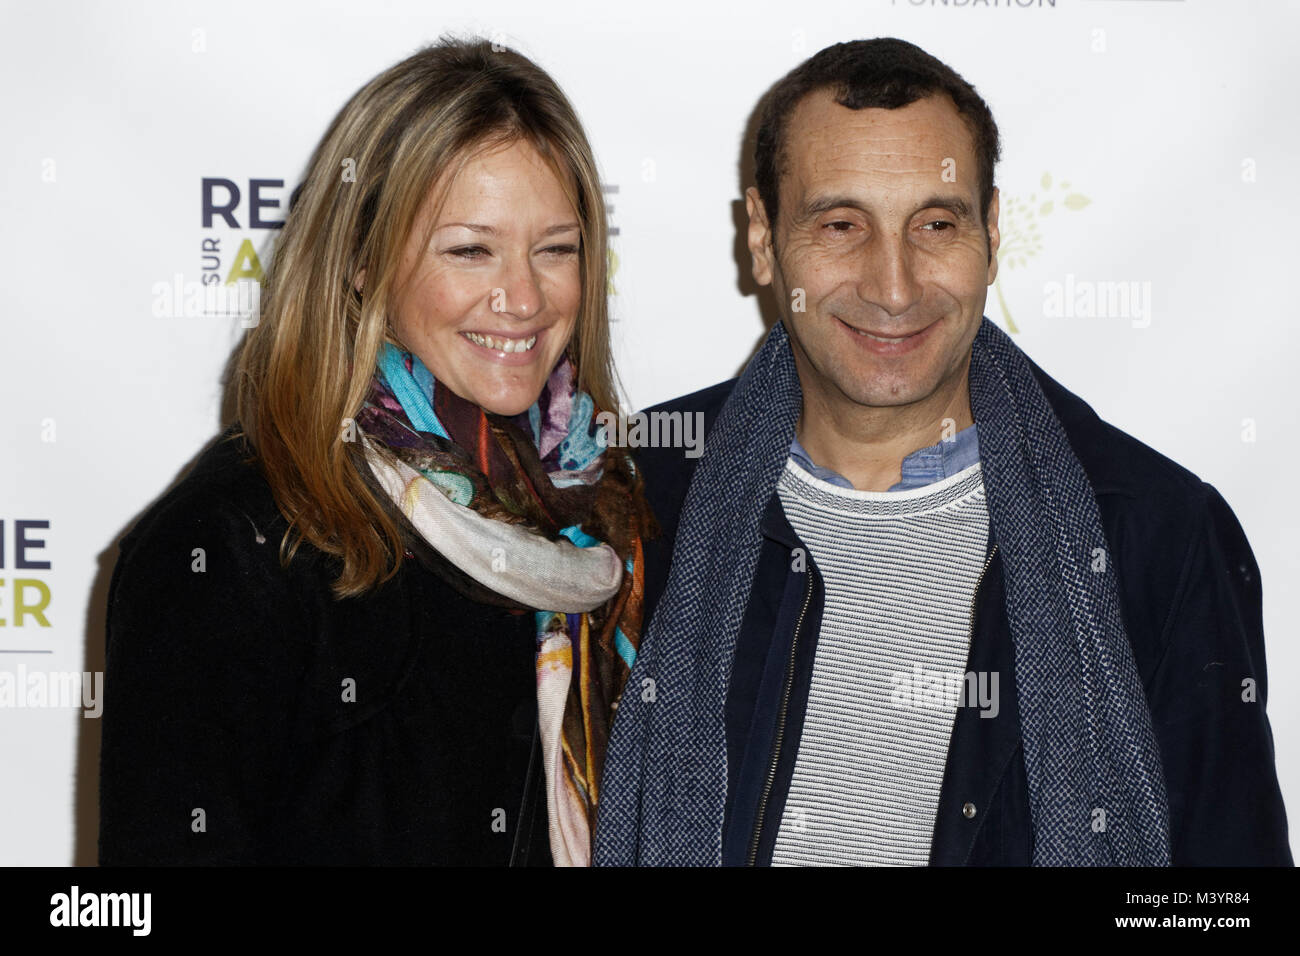 Paris, France. 12th Feb, 2018. Caroline Fraindt and Zinedine Soualem attend the XIIIth Charity Gala against Alzheimer's disease at Salle Pleyel on February 12, 2018 in Paris, France. Credit: Bernard Menigault/Alamy Live News Stock Photo